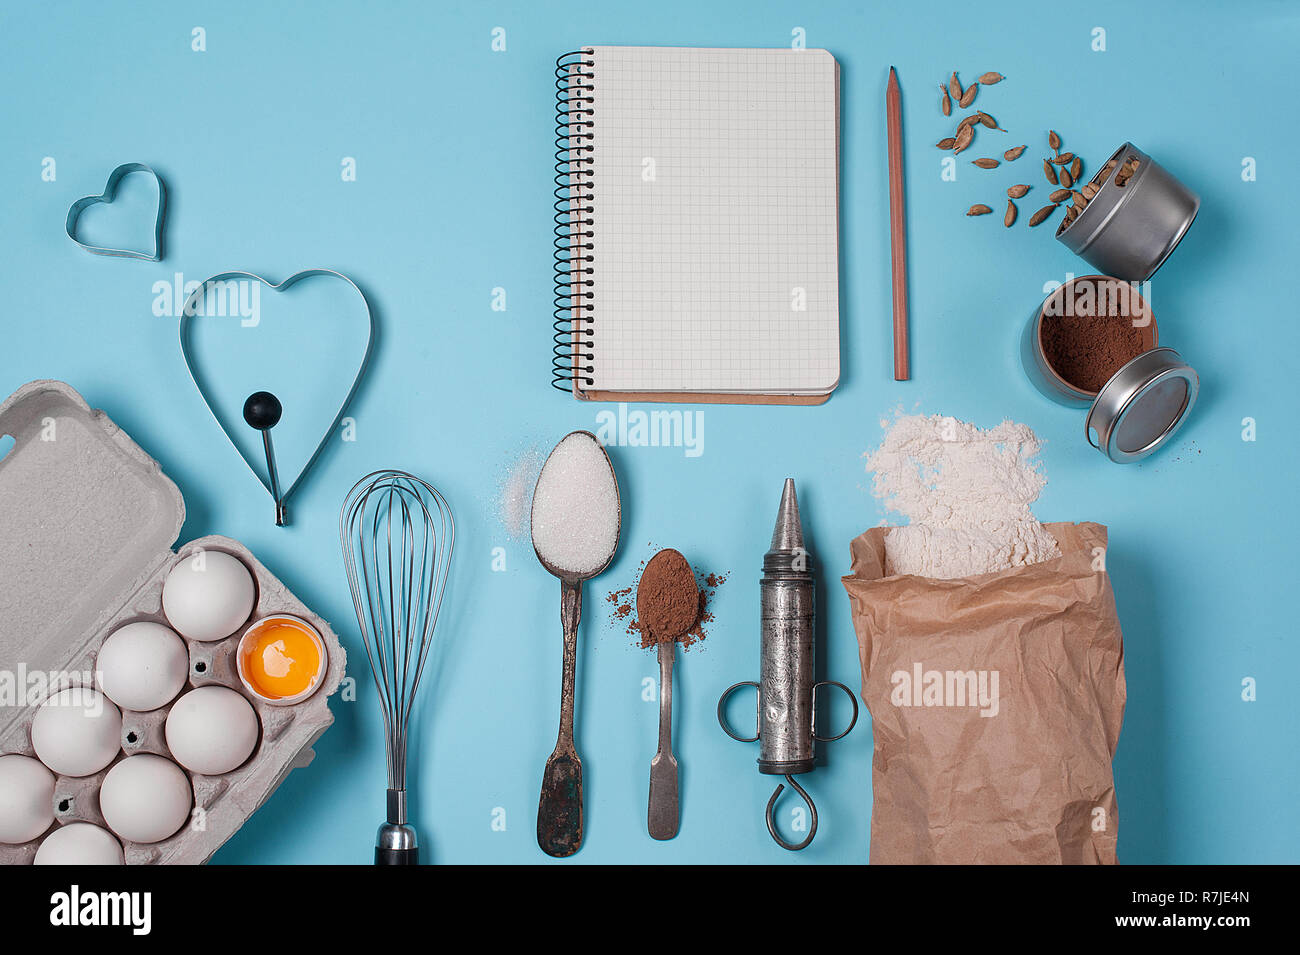 Backing background with ingredients for baking and kitchen tools. Stock Photo